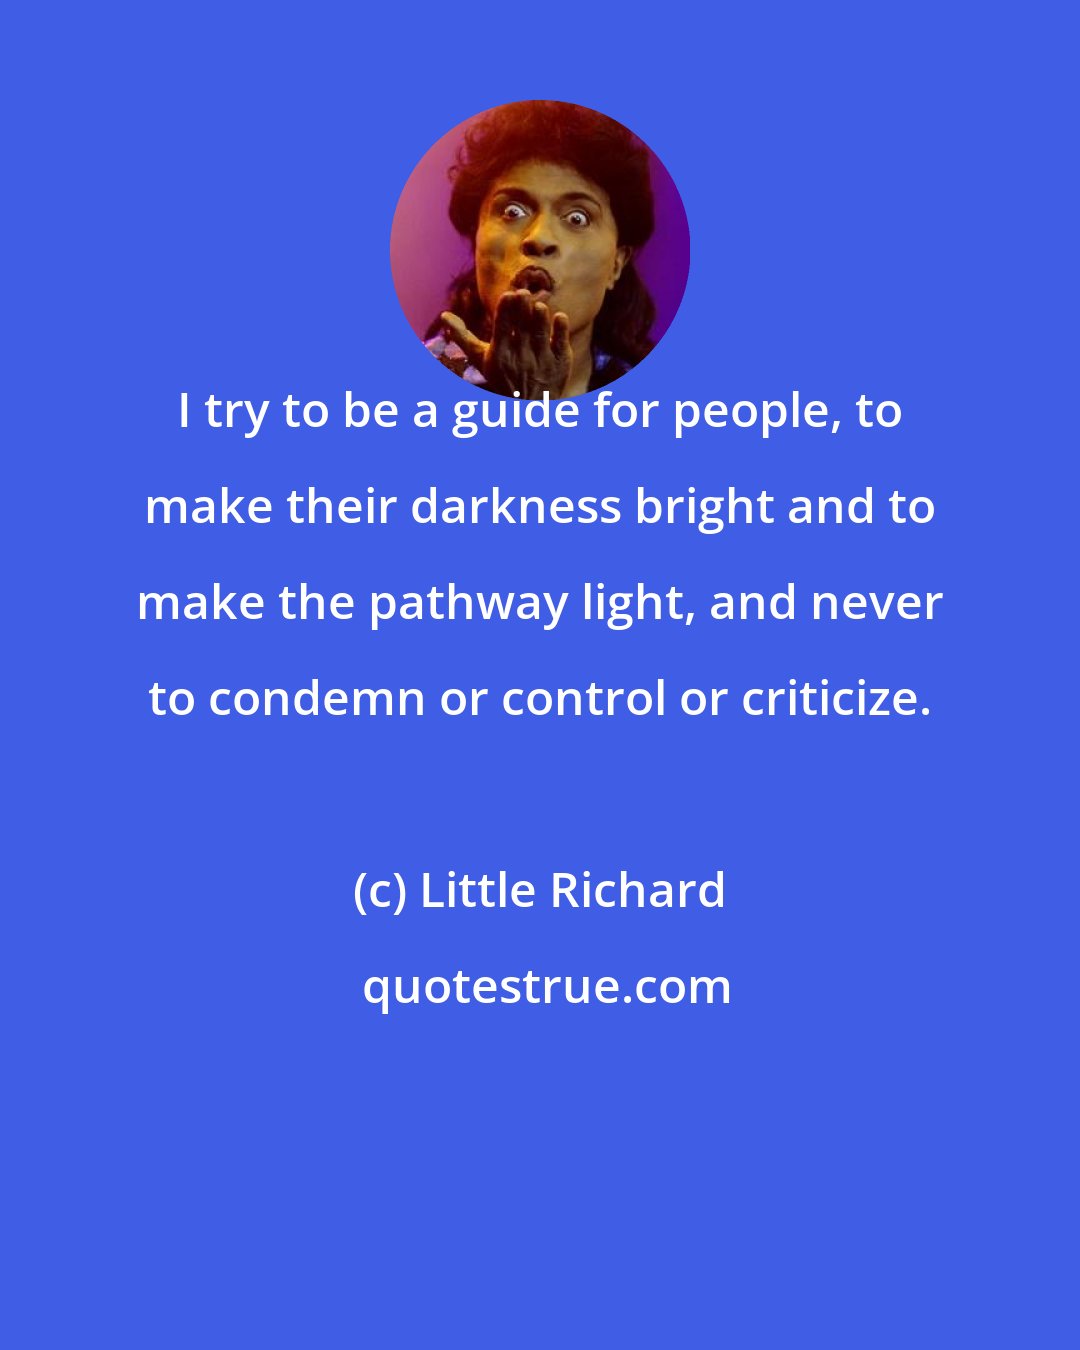 Little Richard: I try to be a guide for people, to make their darkness bright and to make the pathway light, and never to condemn or control or criticize.